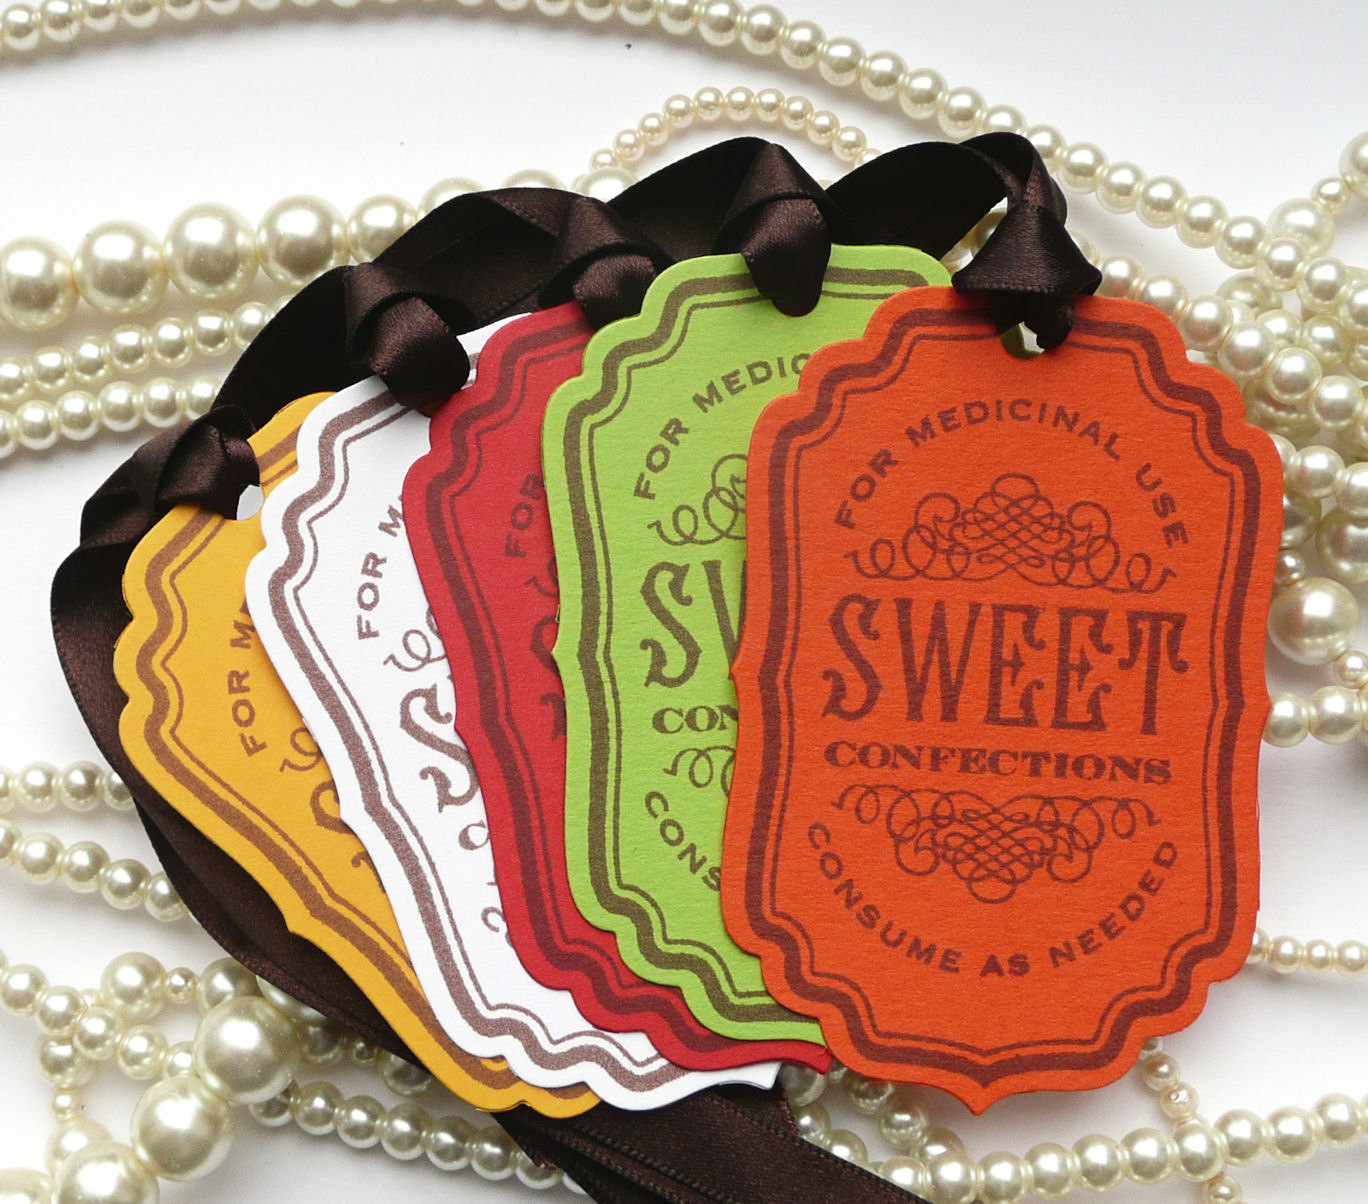 Candy tags